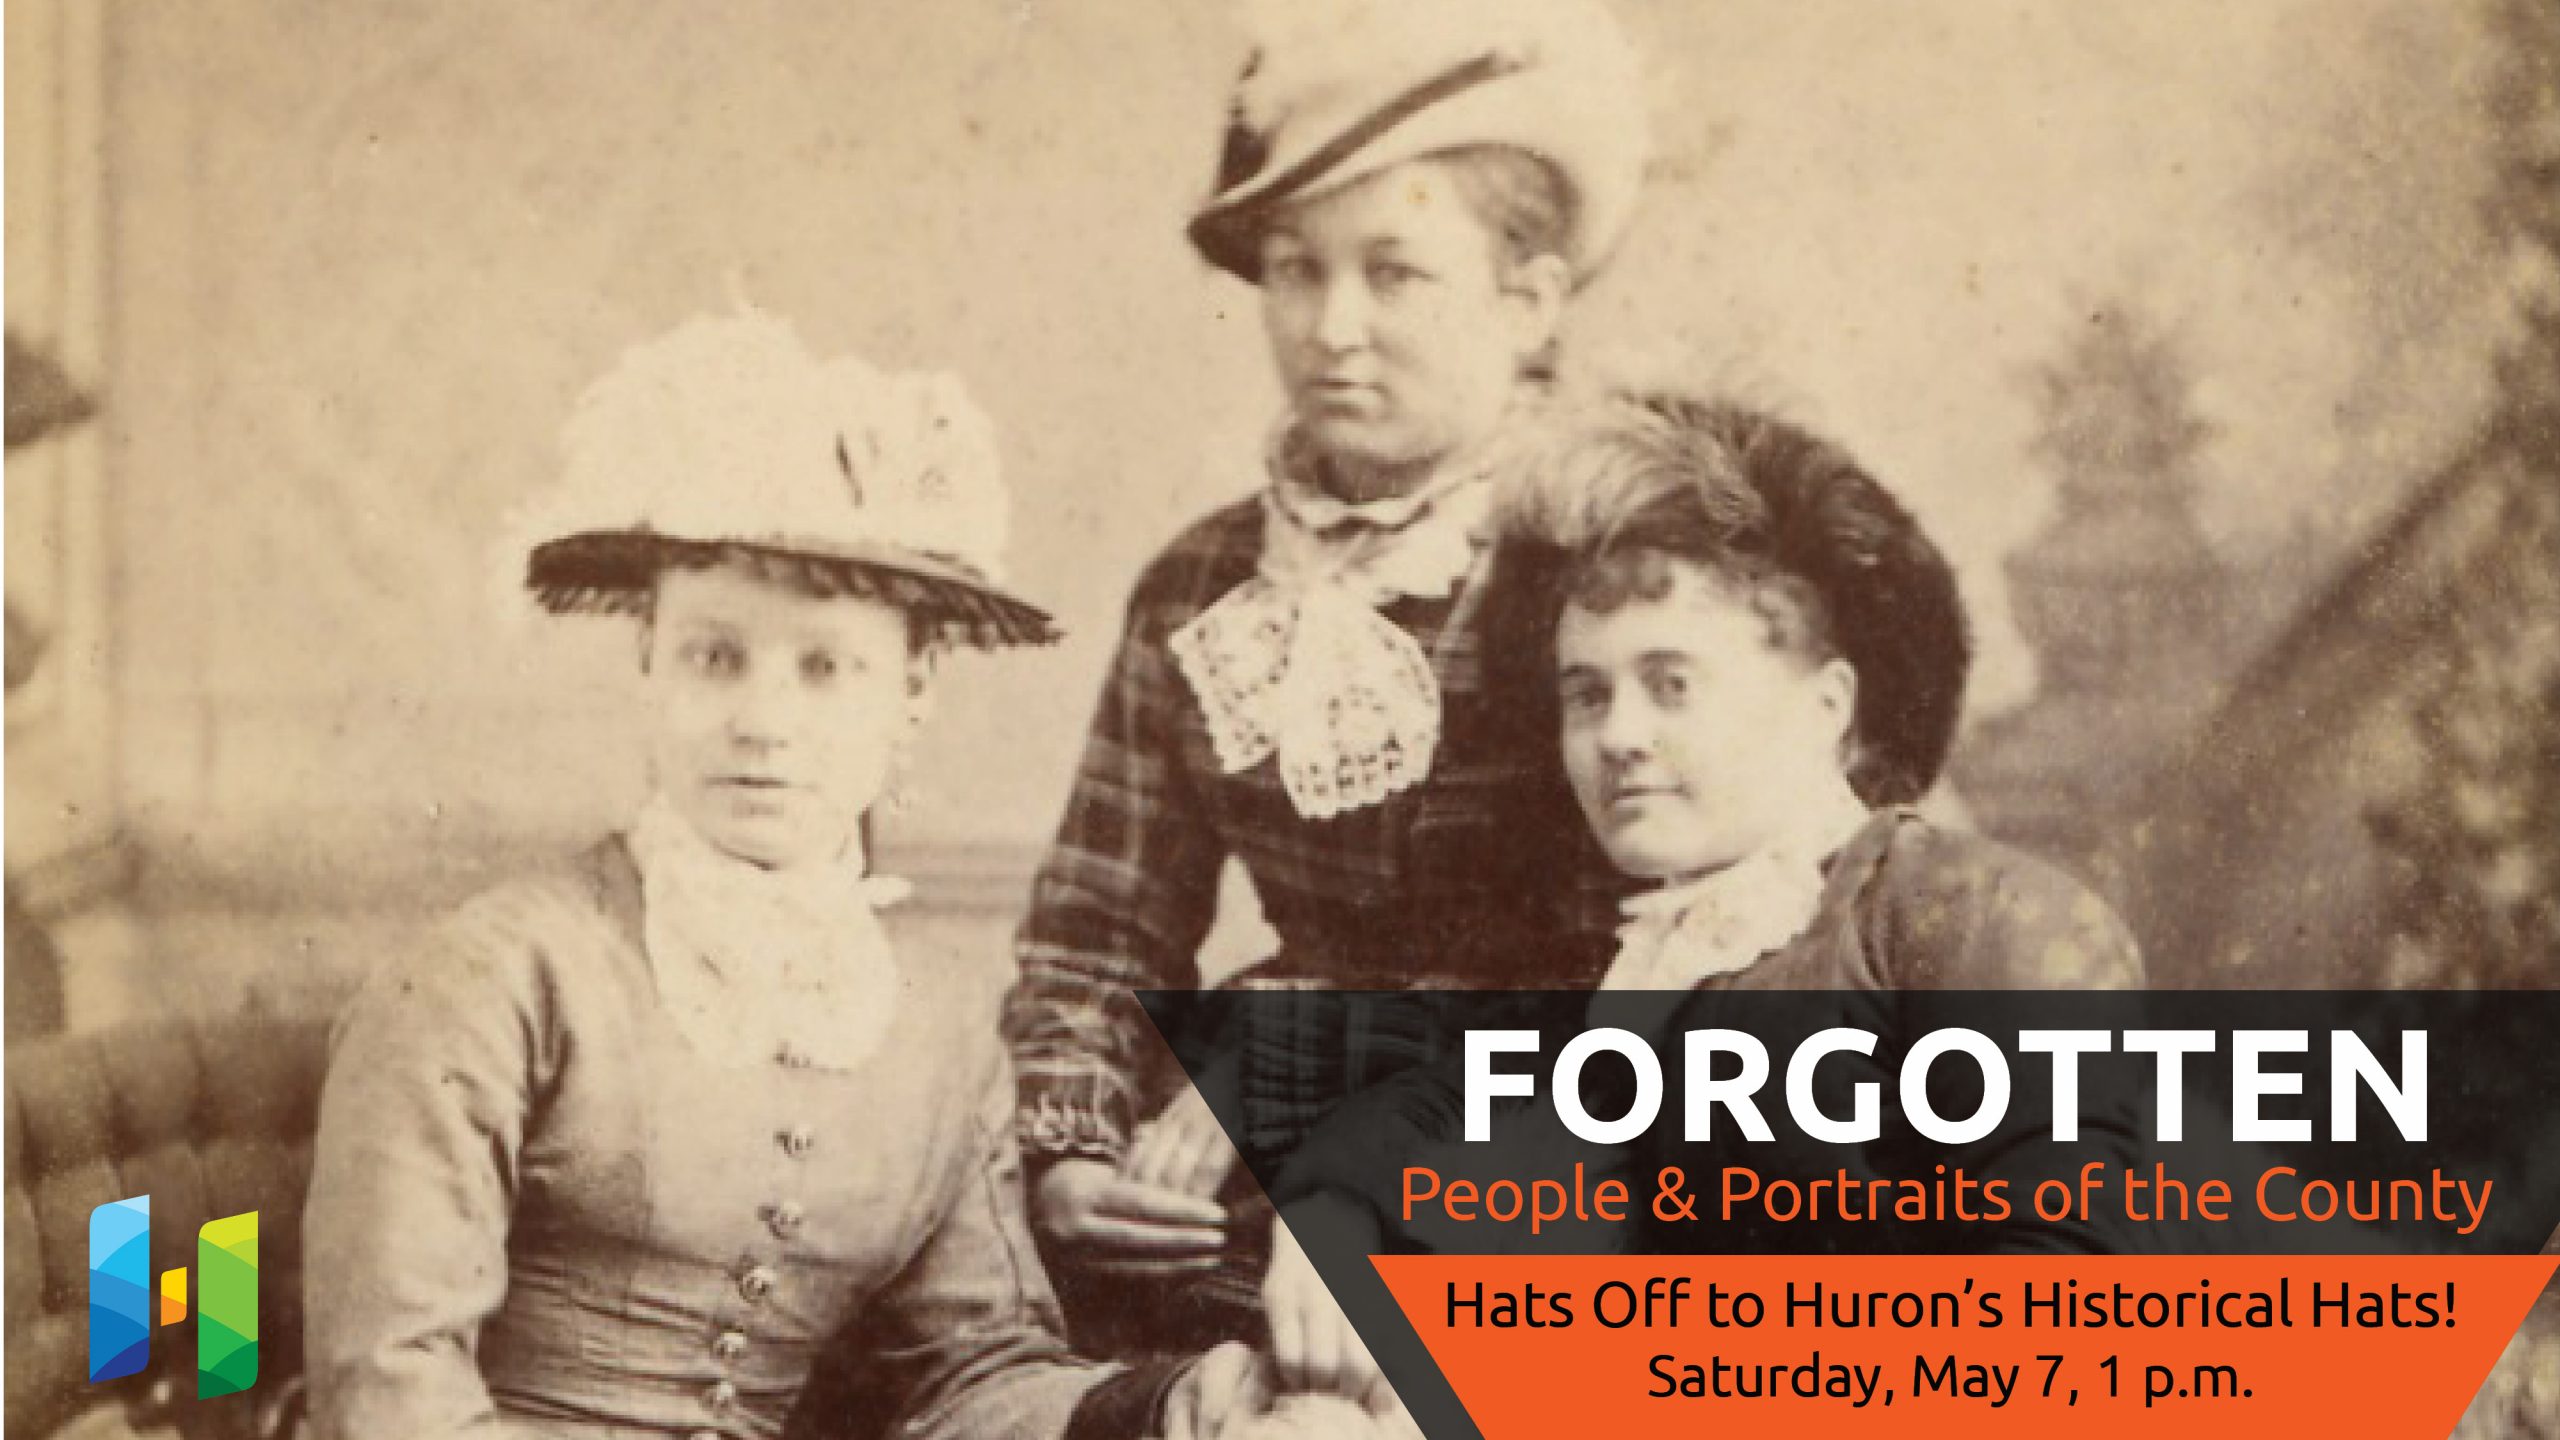 Historic image of three women wearing hats, with text promoting workshop